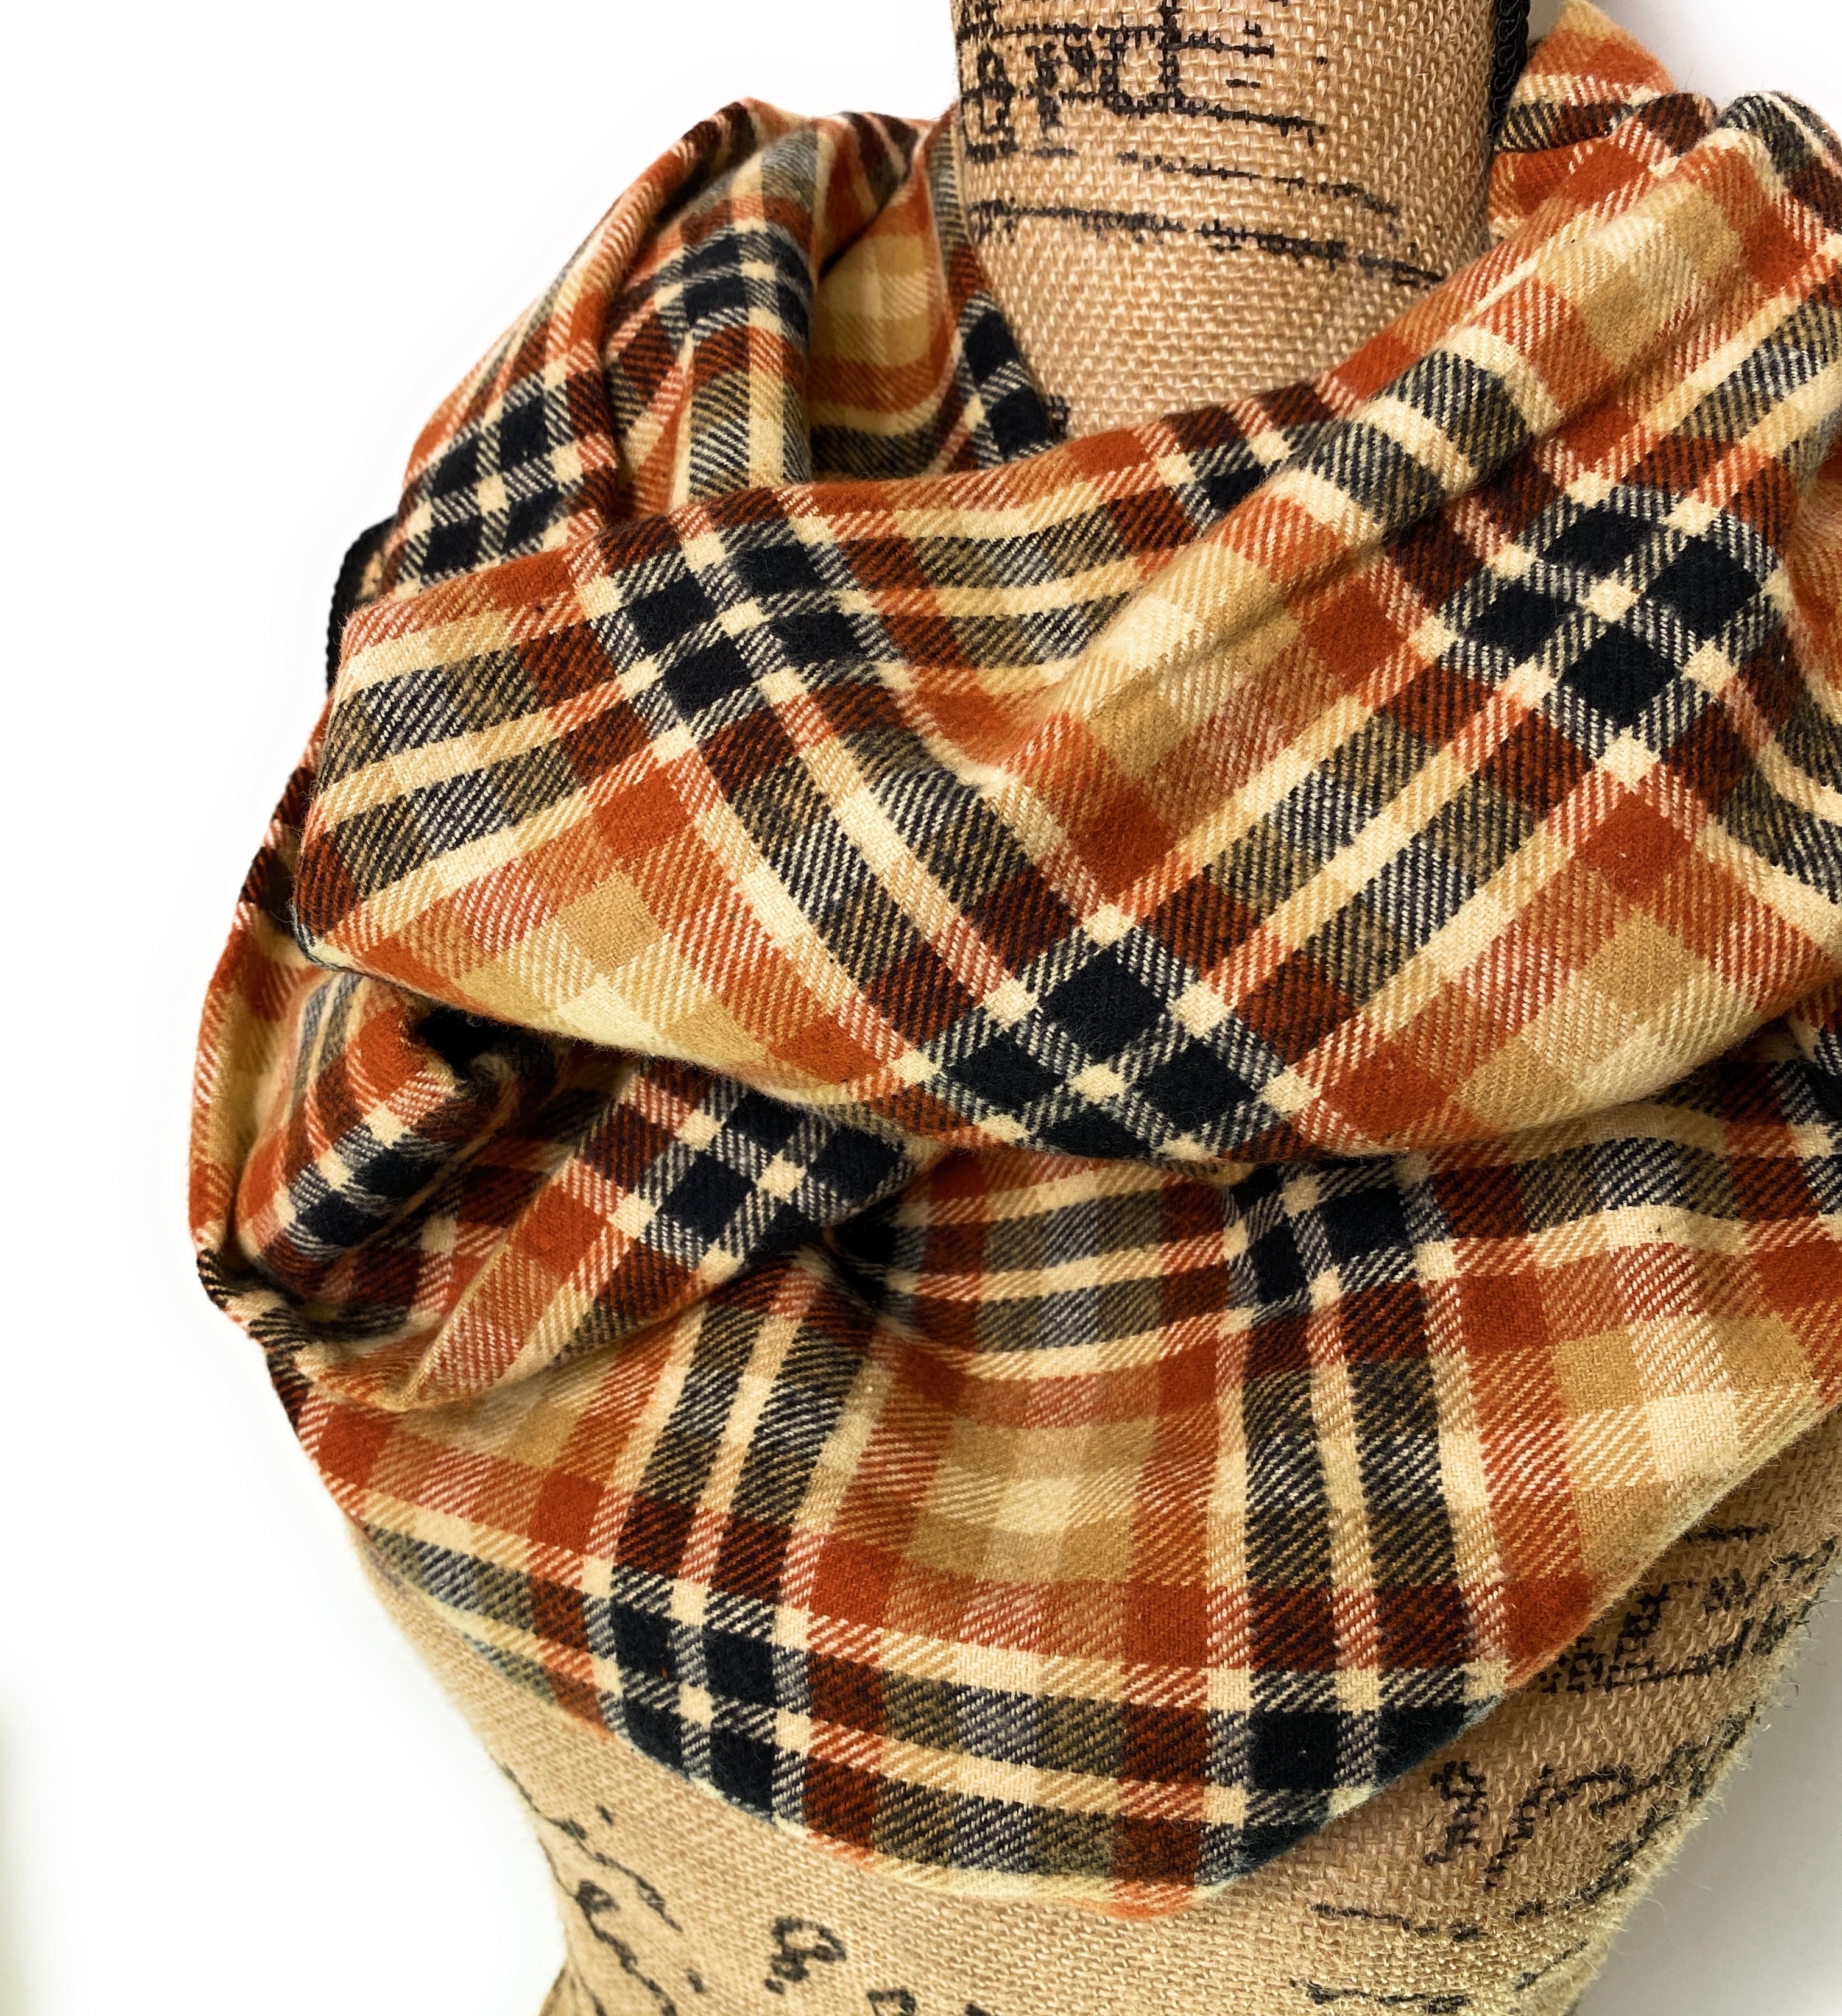 Pumpkin Spice Plaid - Fall Colors of Rusty Orange, Tan, Oatmeal Cream, and Black Plaid Infinity and Blanket Scarves